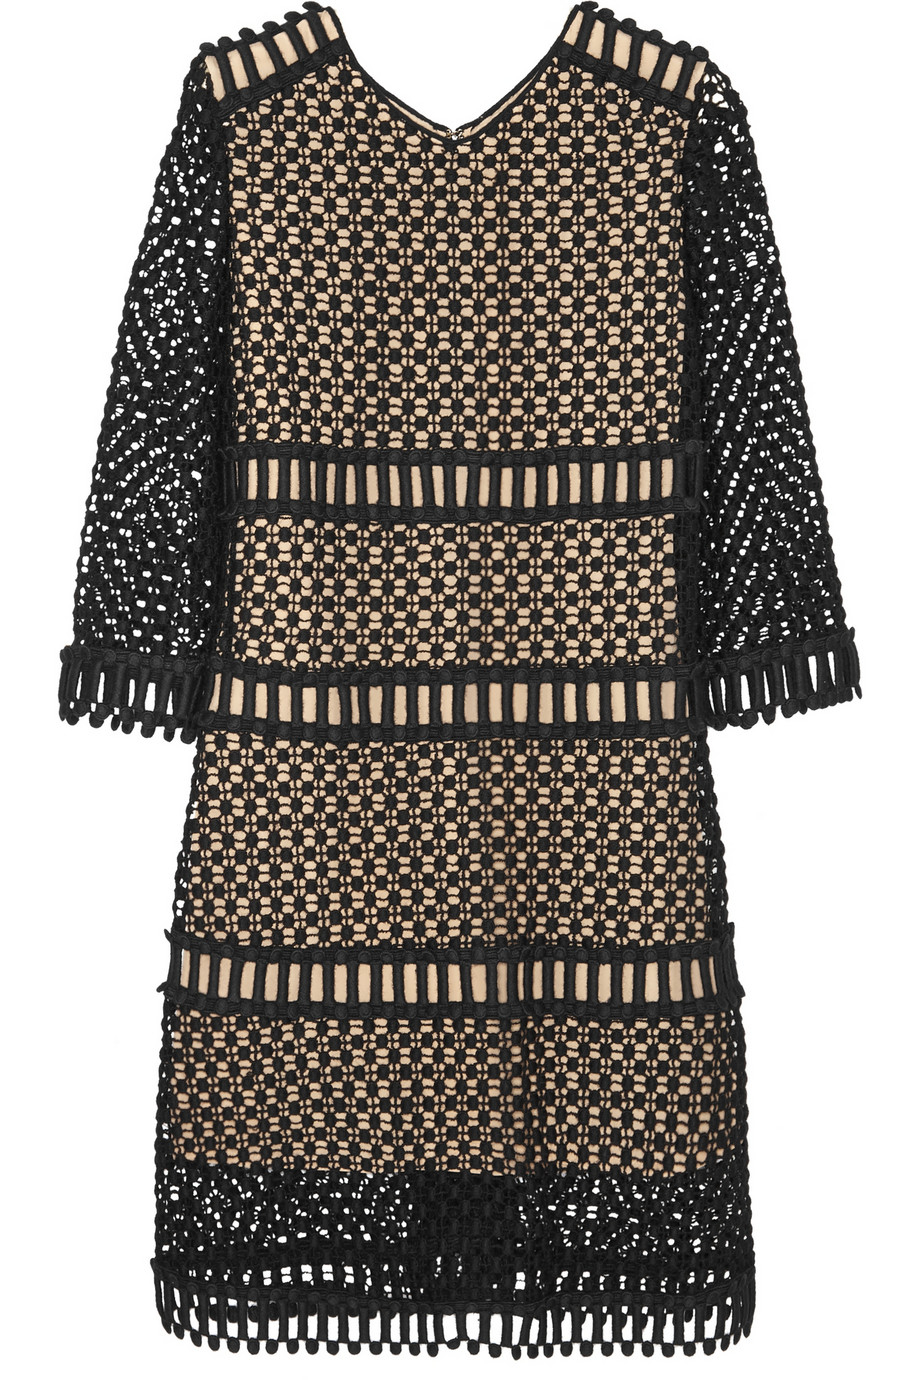 Lyst - Chloé Crocheted Wool And Cotton-Blend Mini Dress in Black